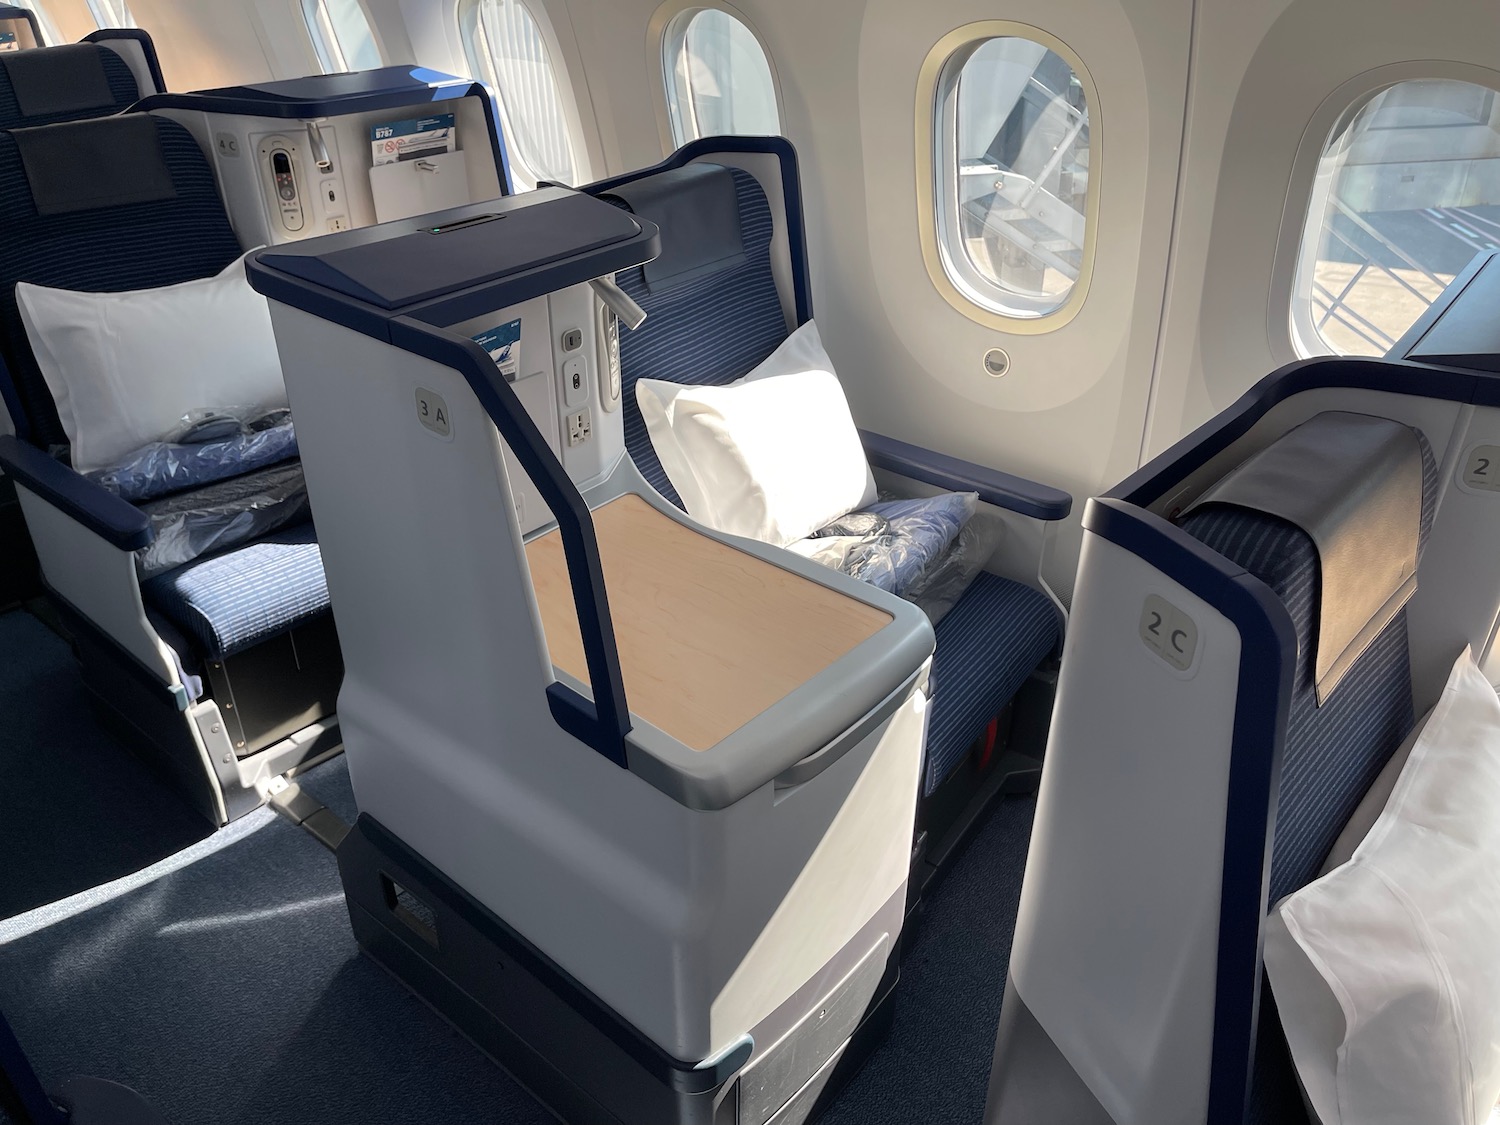 Review: ANA 787-9 Business Class - Live and Let's Fly